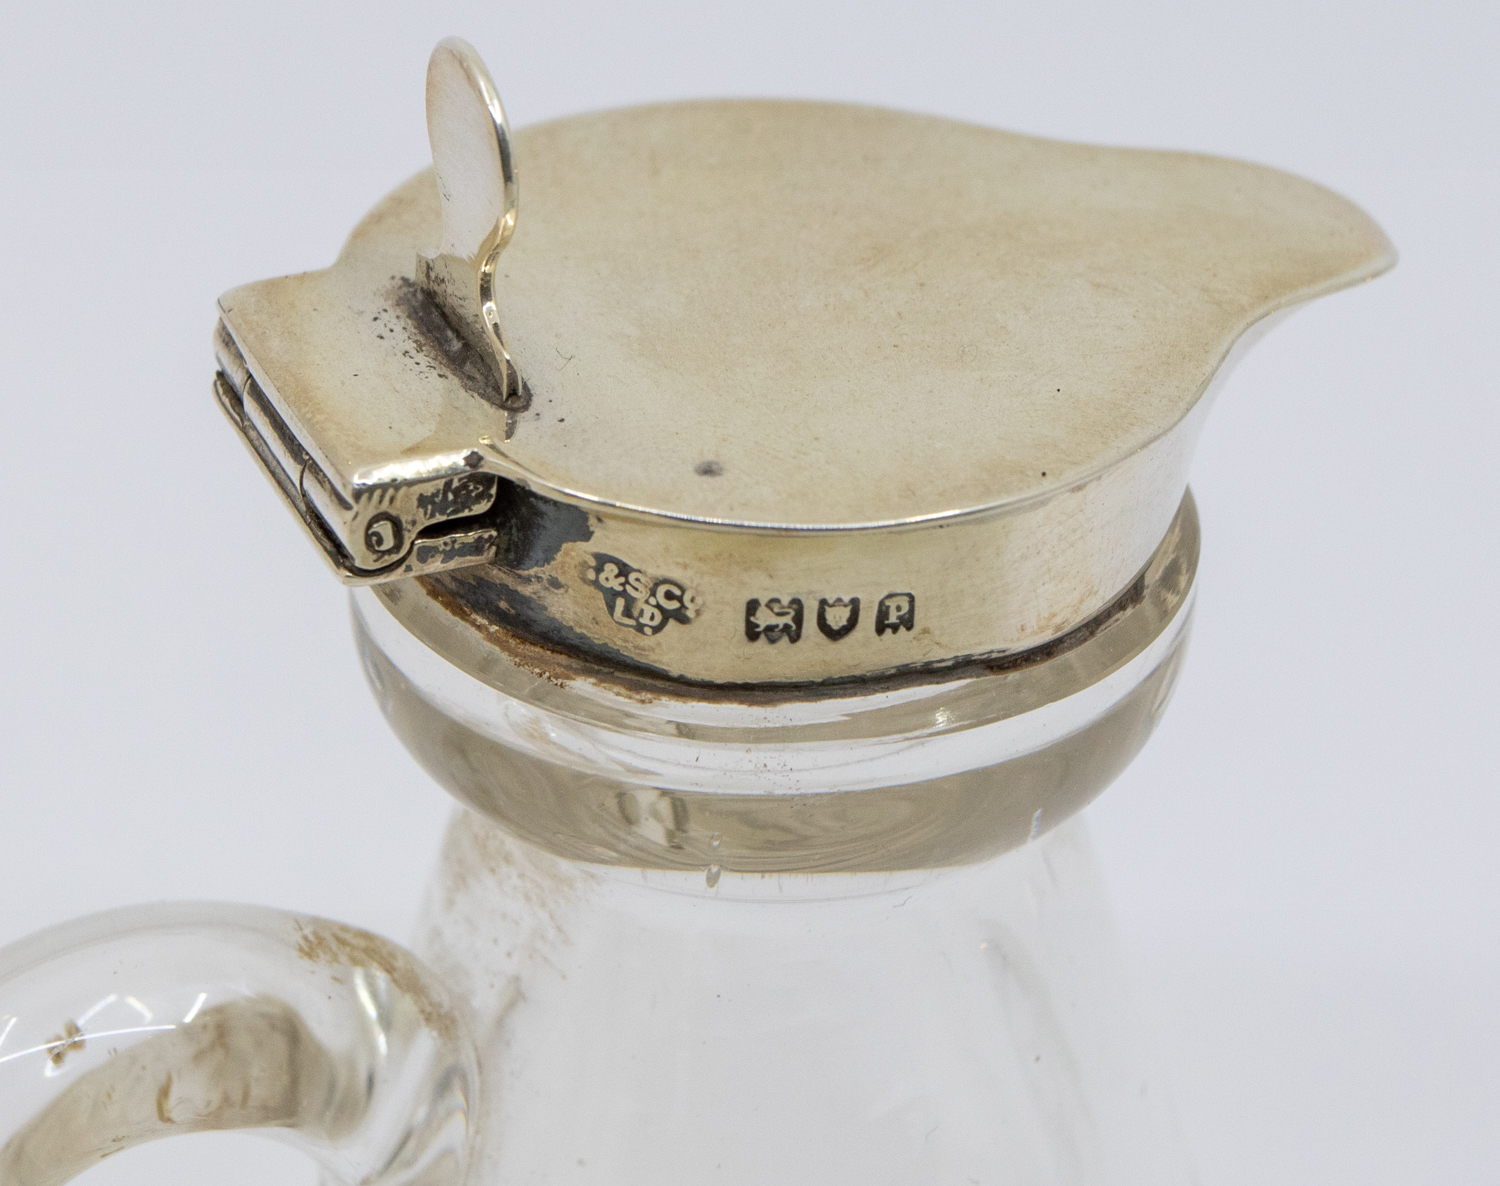 A late Edwardian silver mounted glass whisky noggin, hinged cover, hallmarked by Goldsmiths & - Image 2 of 2